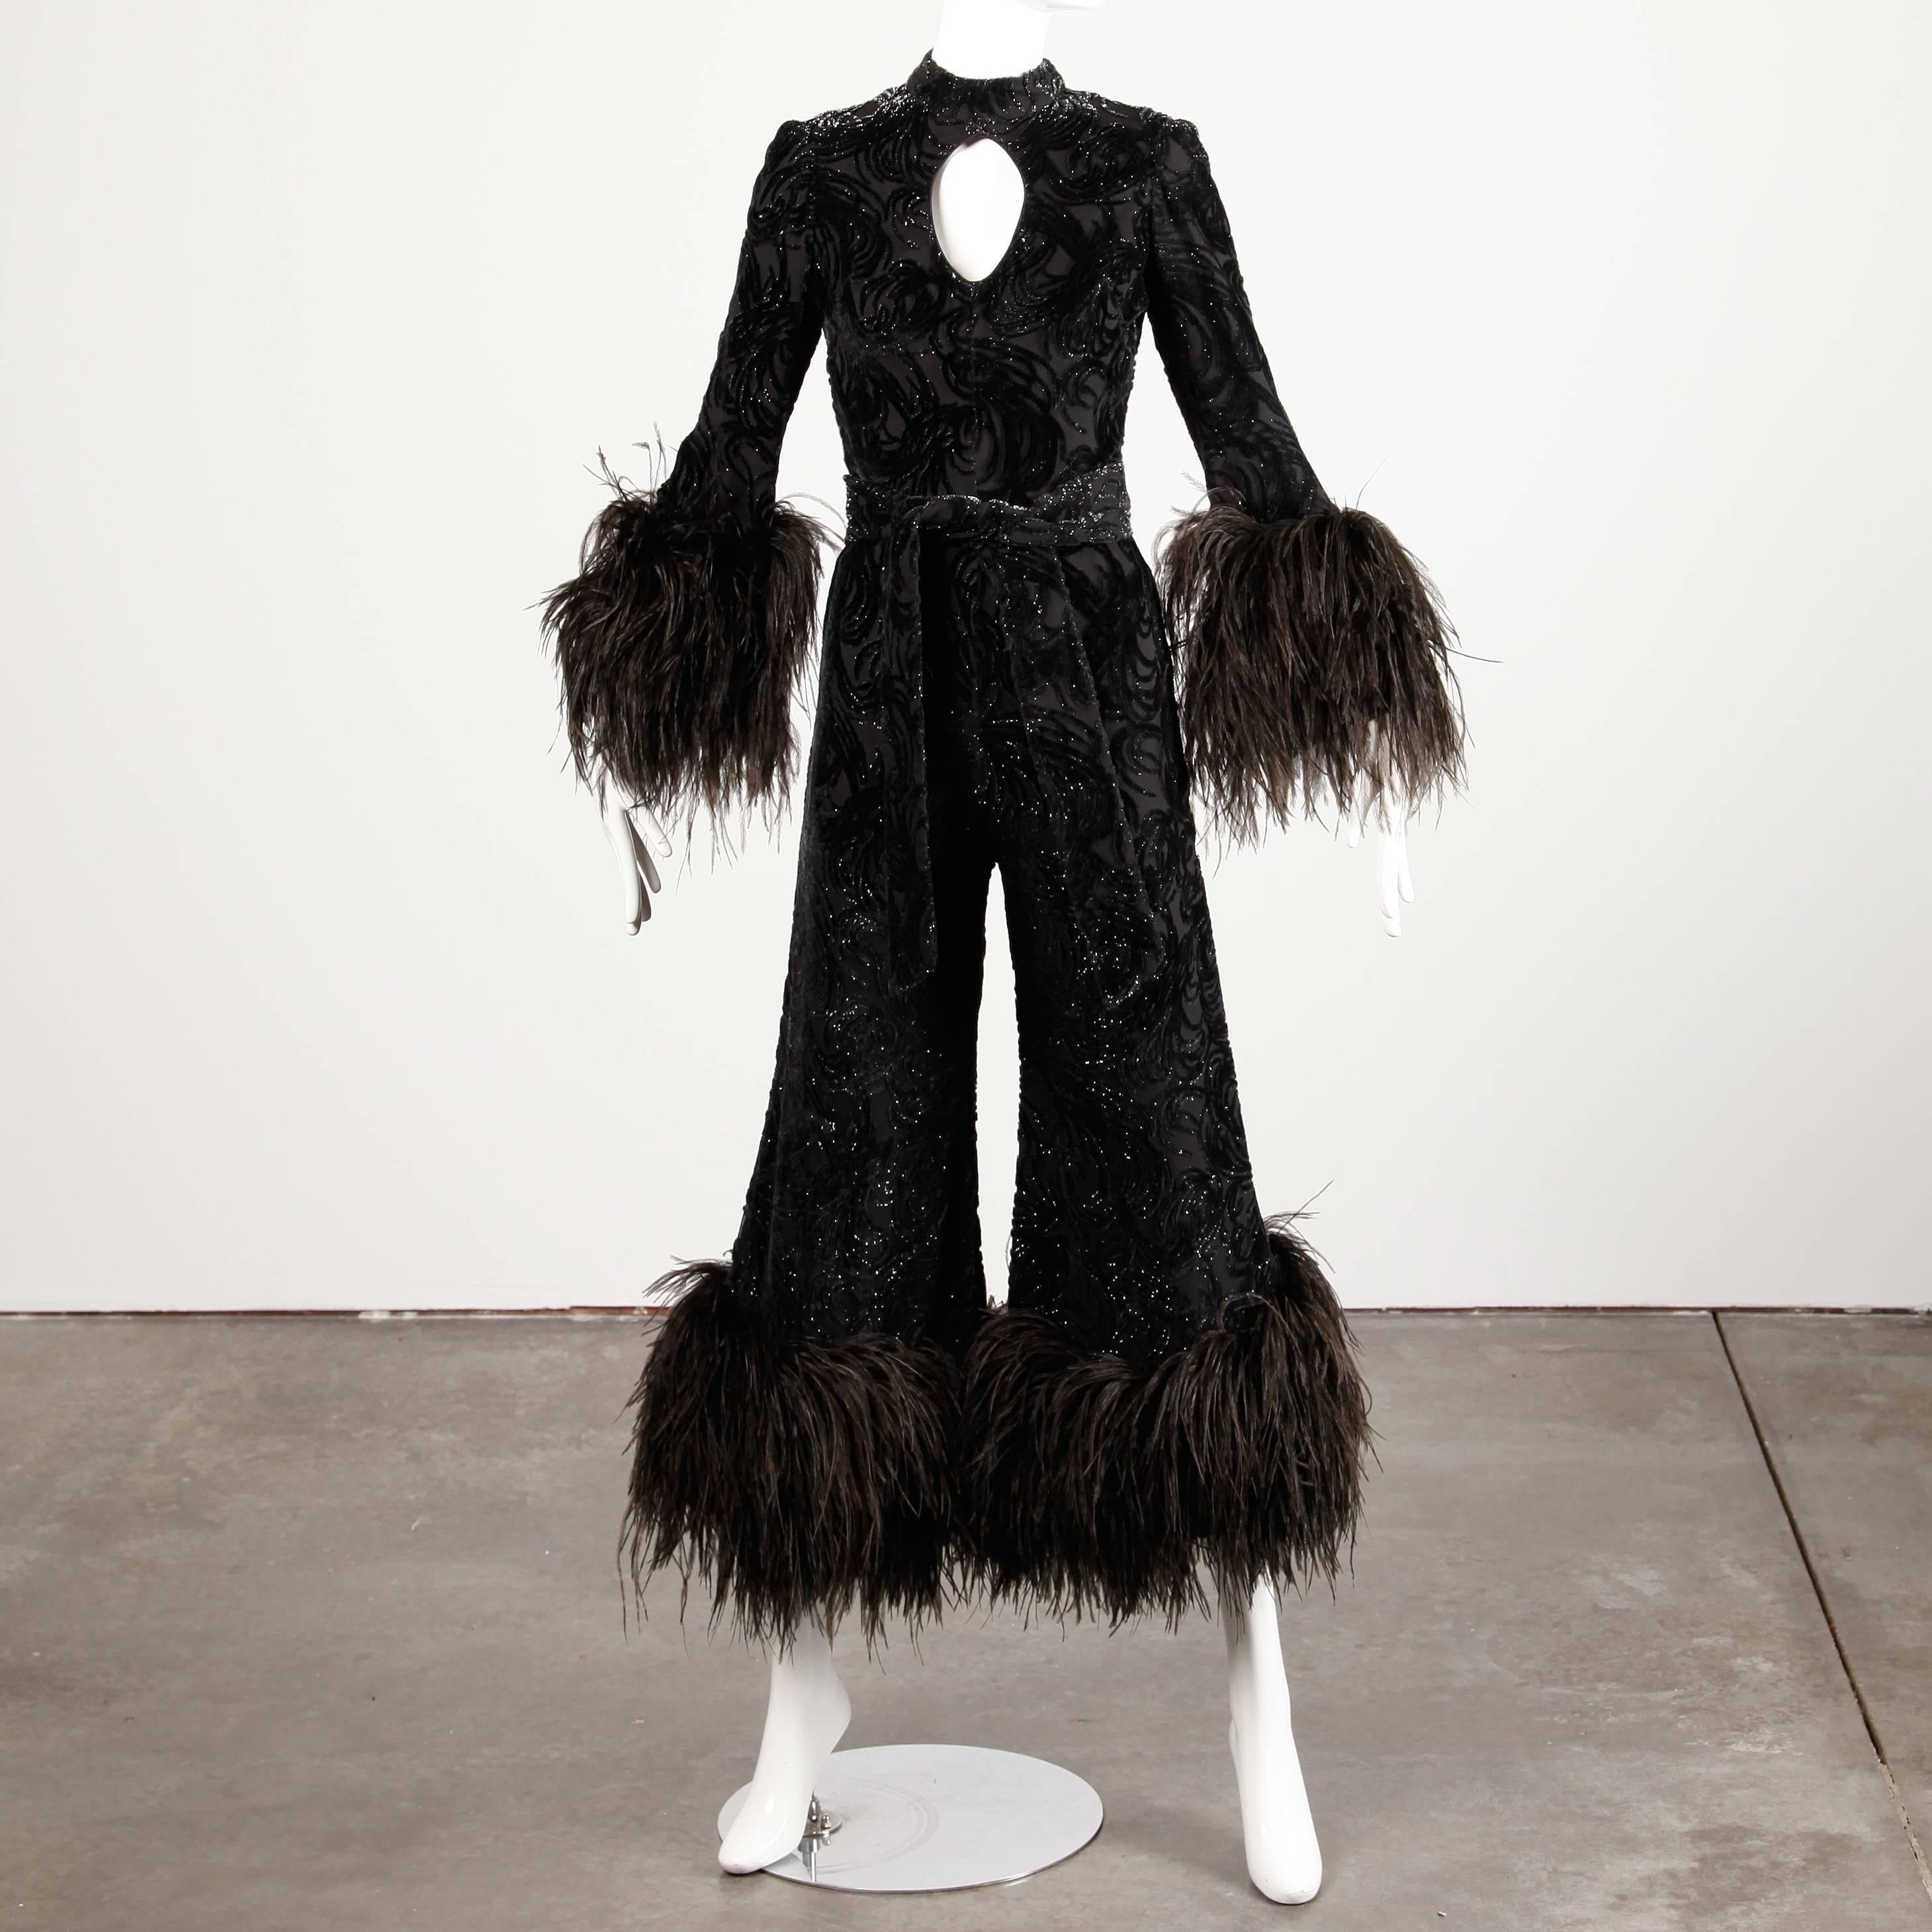 Show stopping vintage 1970s black burnout velvet jumpsuit with massive ostrich feather cuffs and a cut out keyhole neckline by Lillie Rubin. Fabric is textured with flecks of metallic. There is a matching sash that ties around the waist and is not